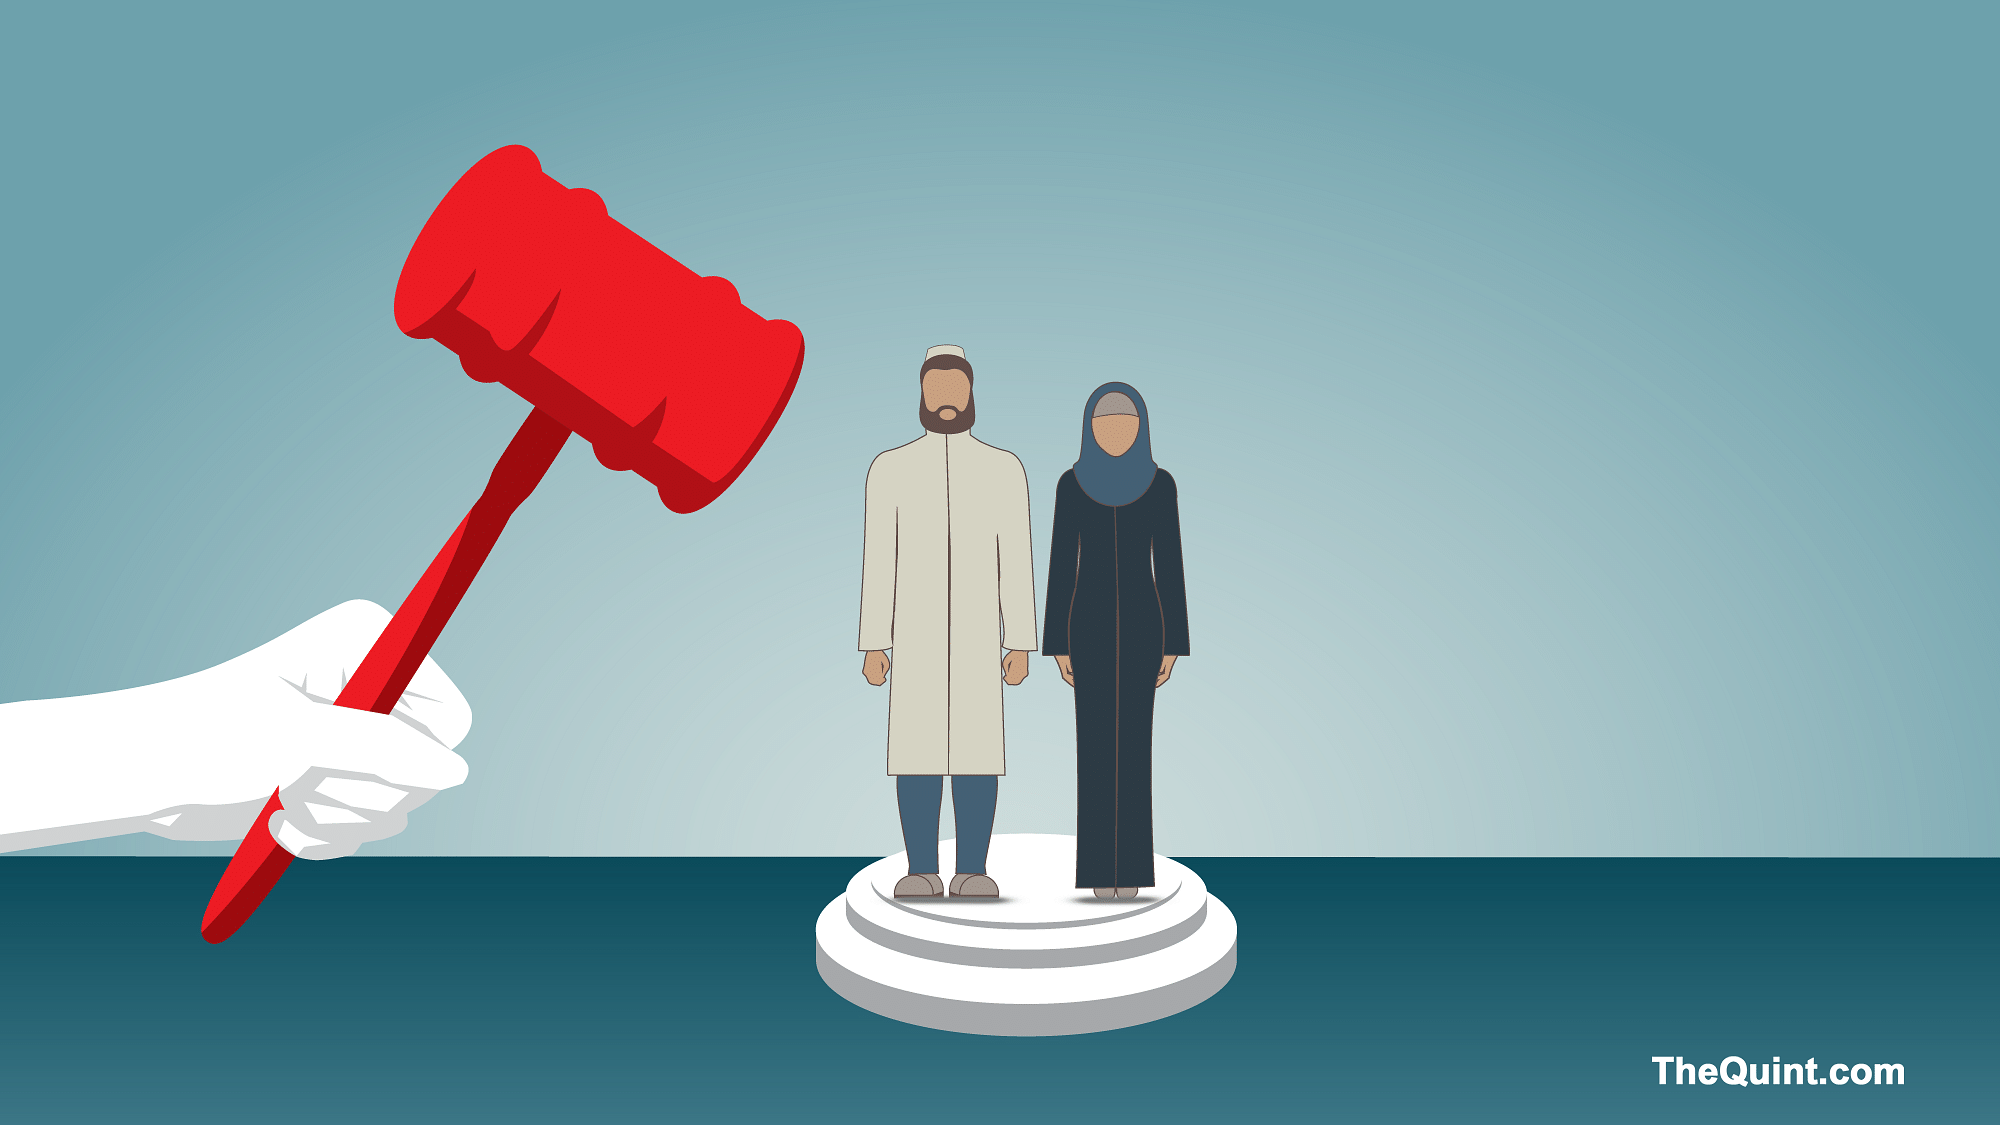 According to Muslim personal law based on the Sharia, a Muslim man can divorce his wife by pronouncing talaq thrice. (Photo: <b>The Quint</b>)